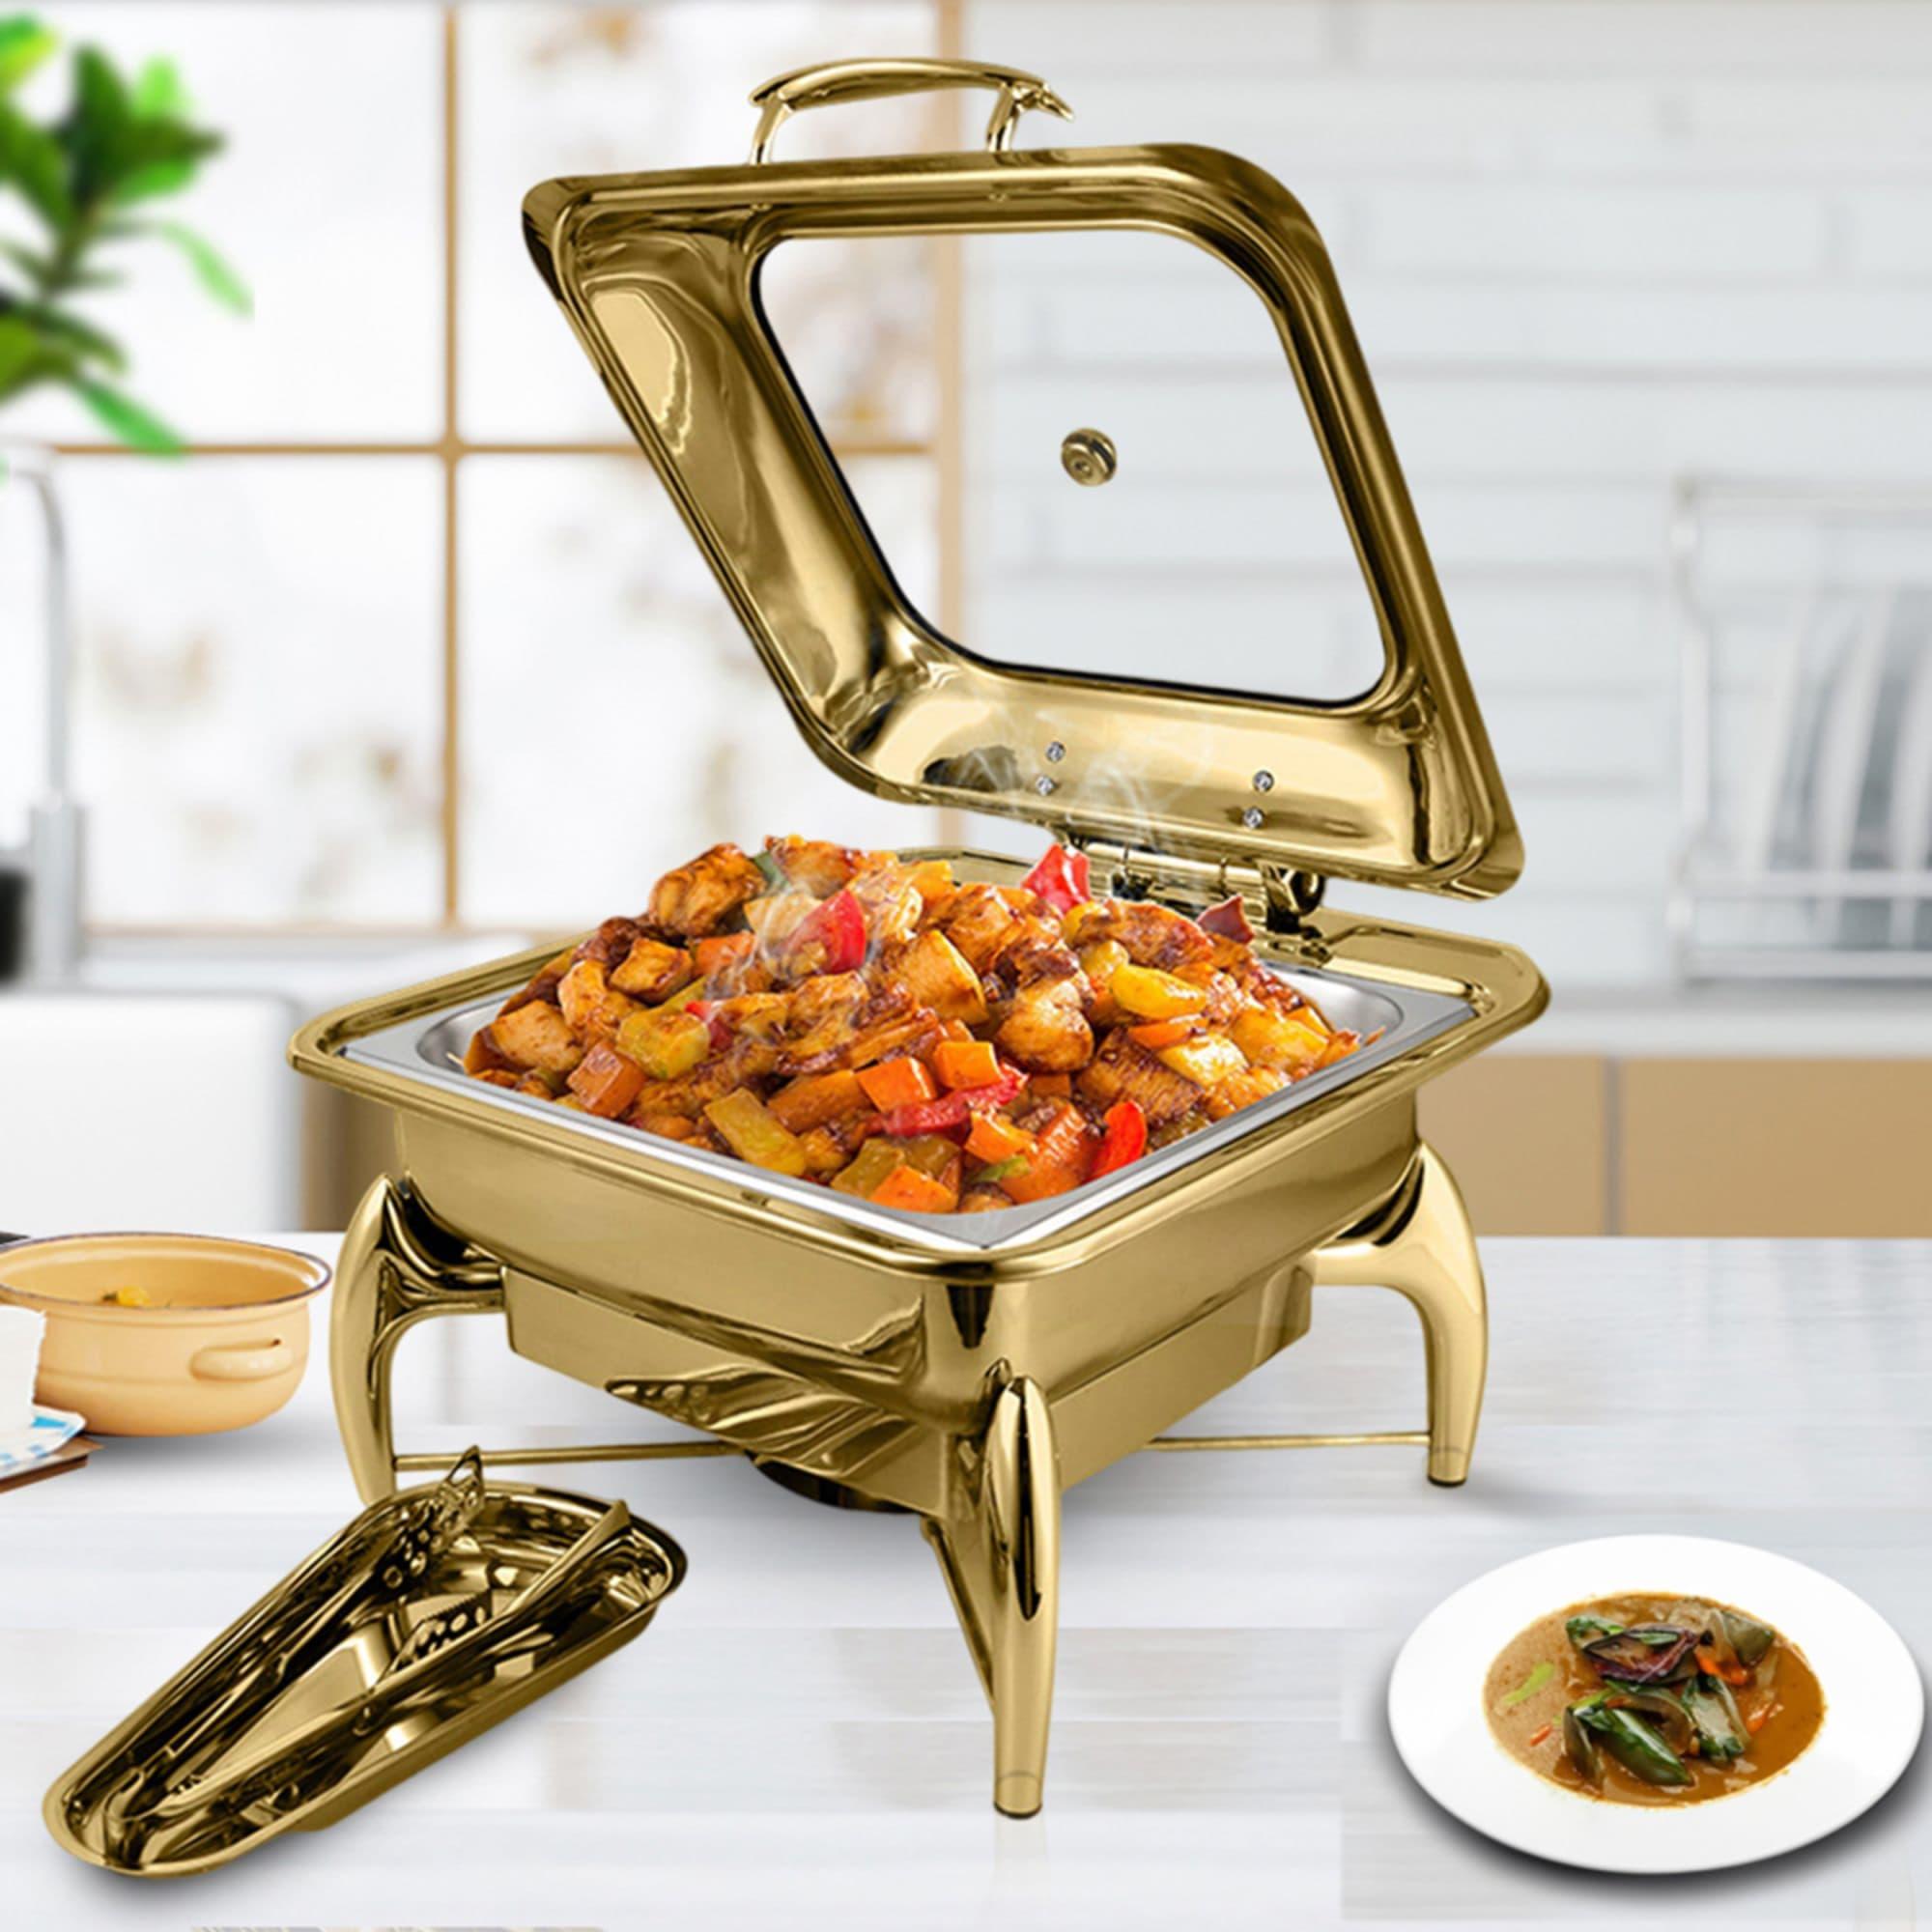 Soga Square Stainless Steel Chafing Dish with Top Lid Gold Image 3